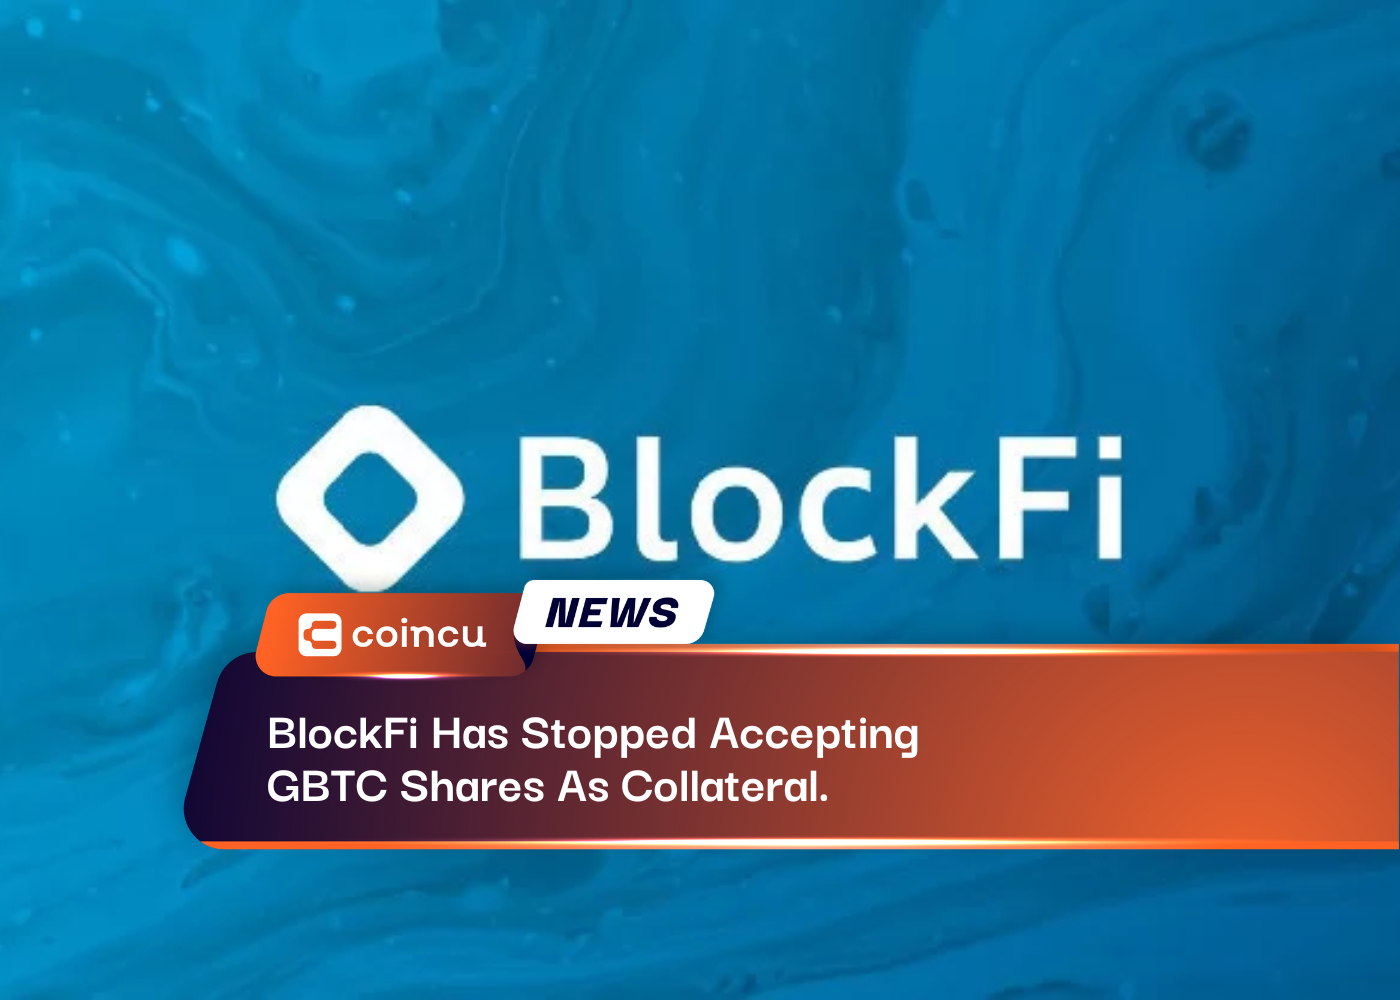 BlockFi Has Stopped Accepting GBTC Shares As Collateral.